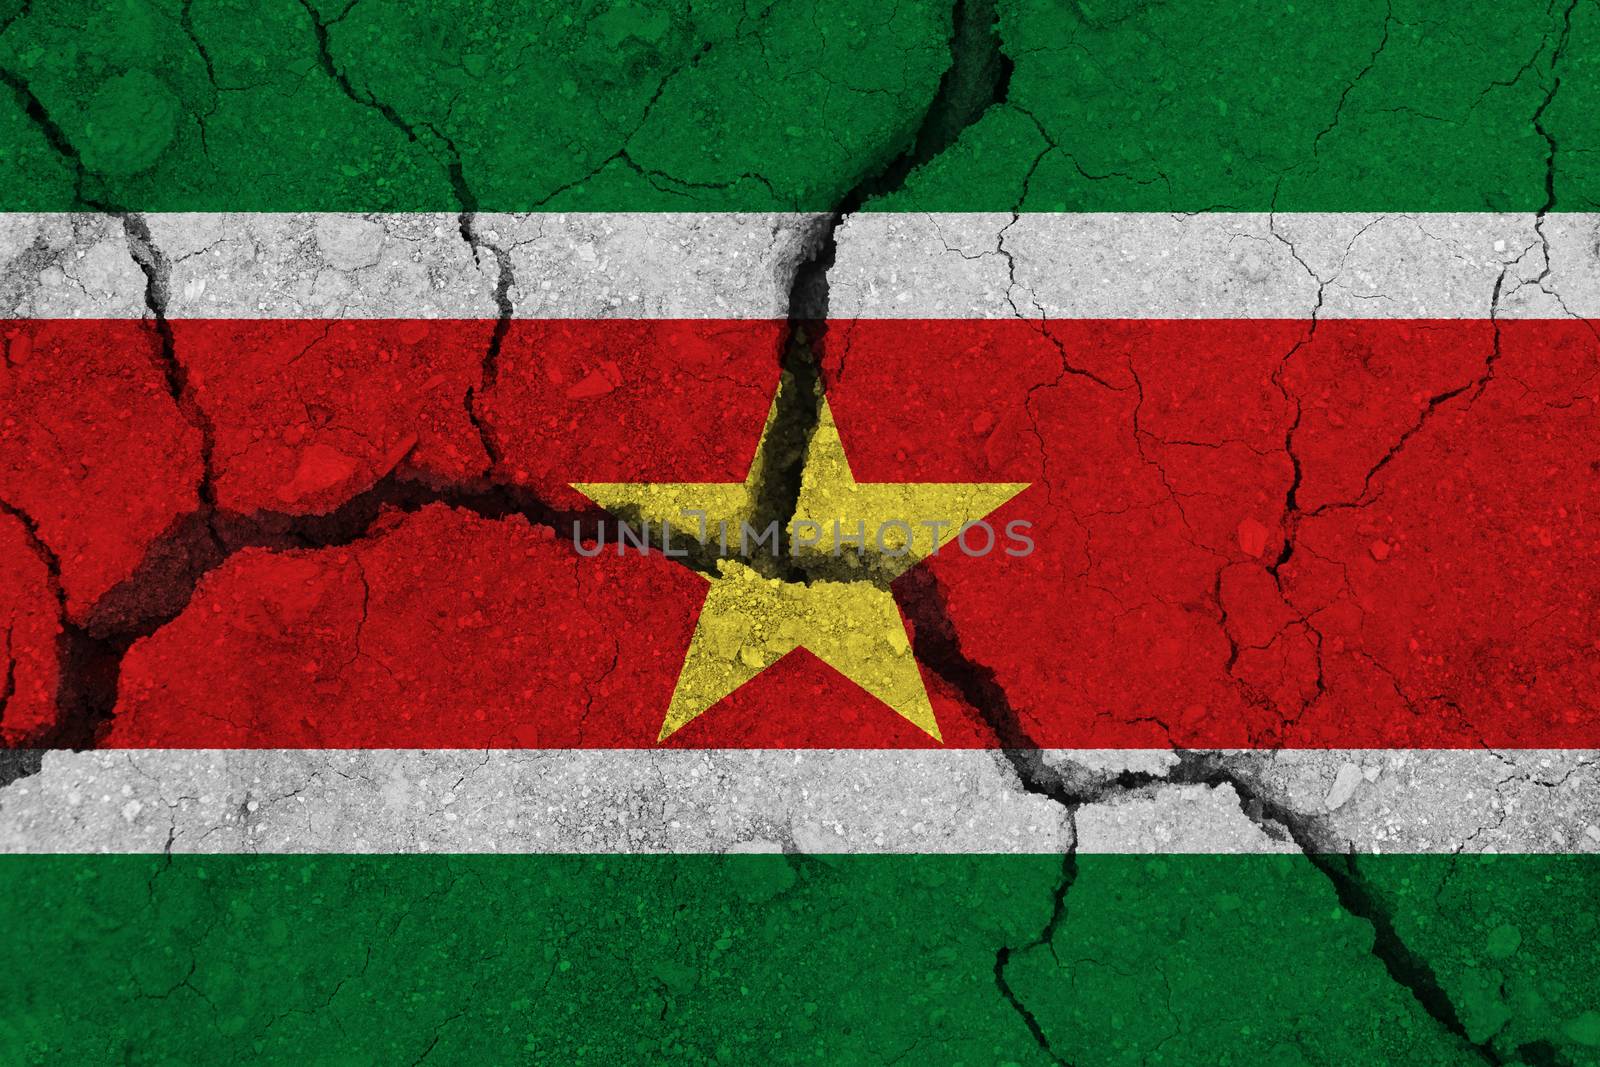 Suriname flag on the cracked earth. National flag of Suriname. Earthquake or drought concept